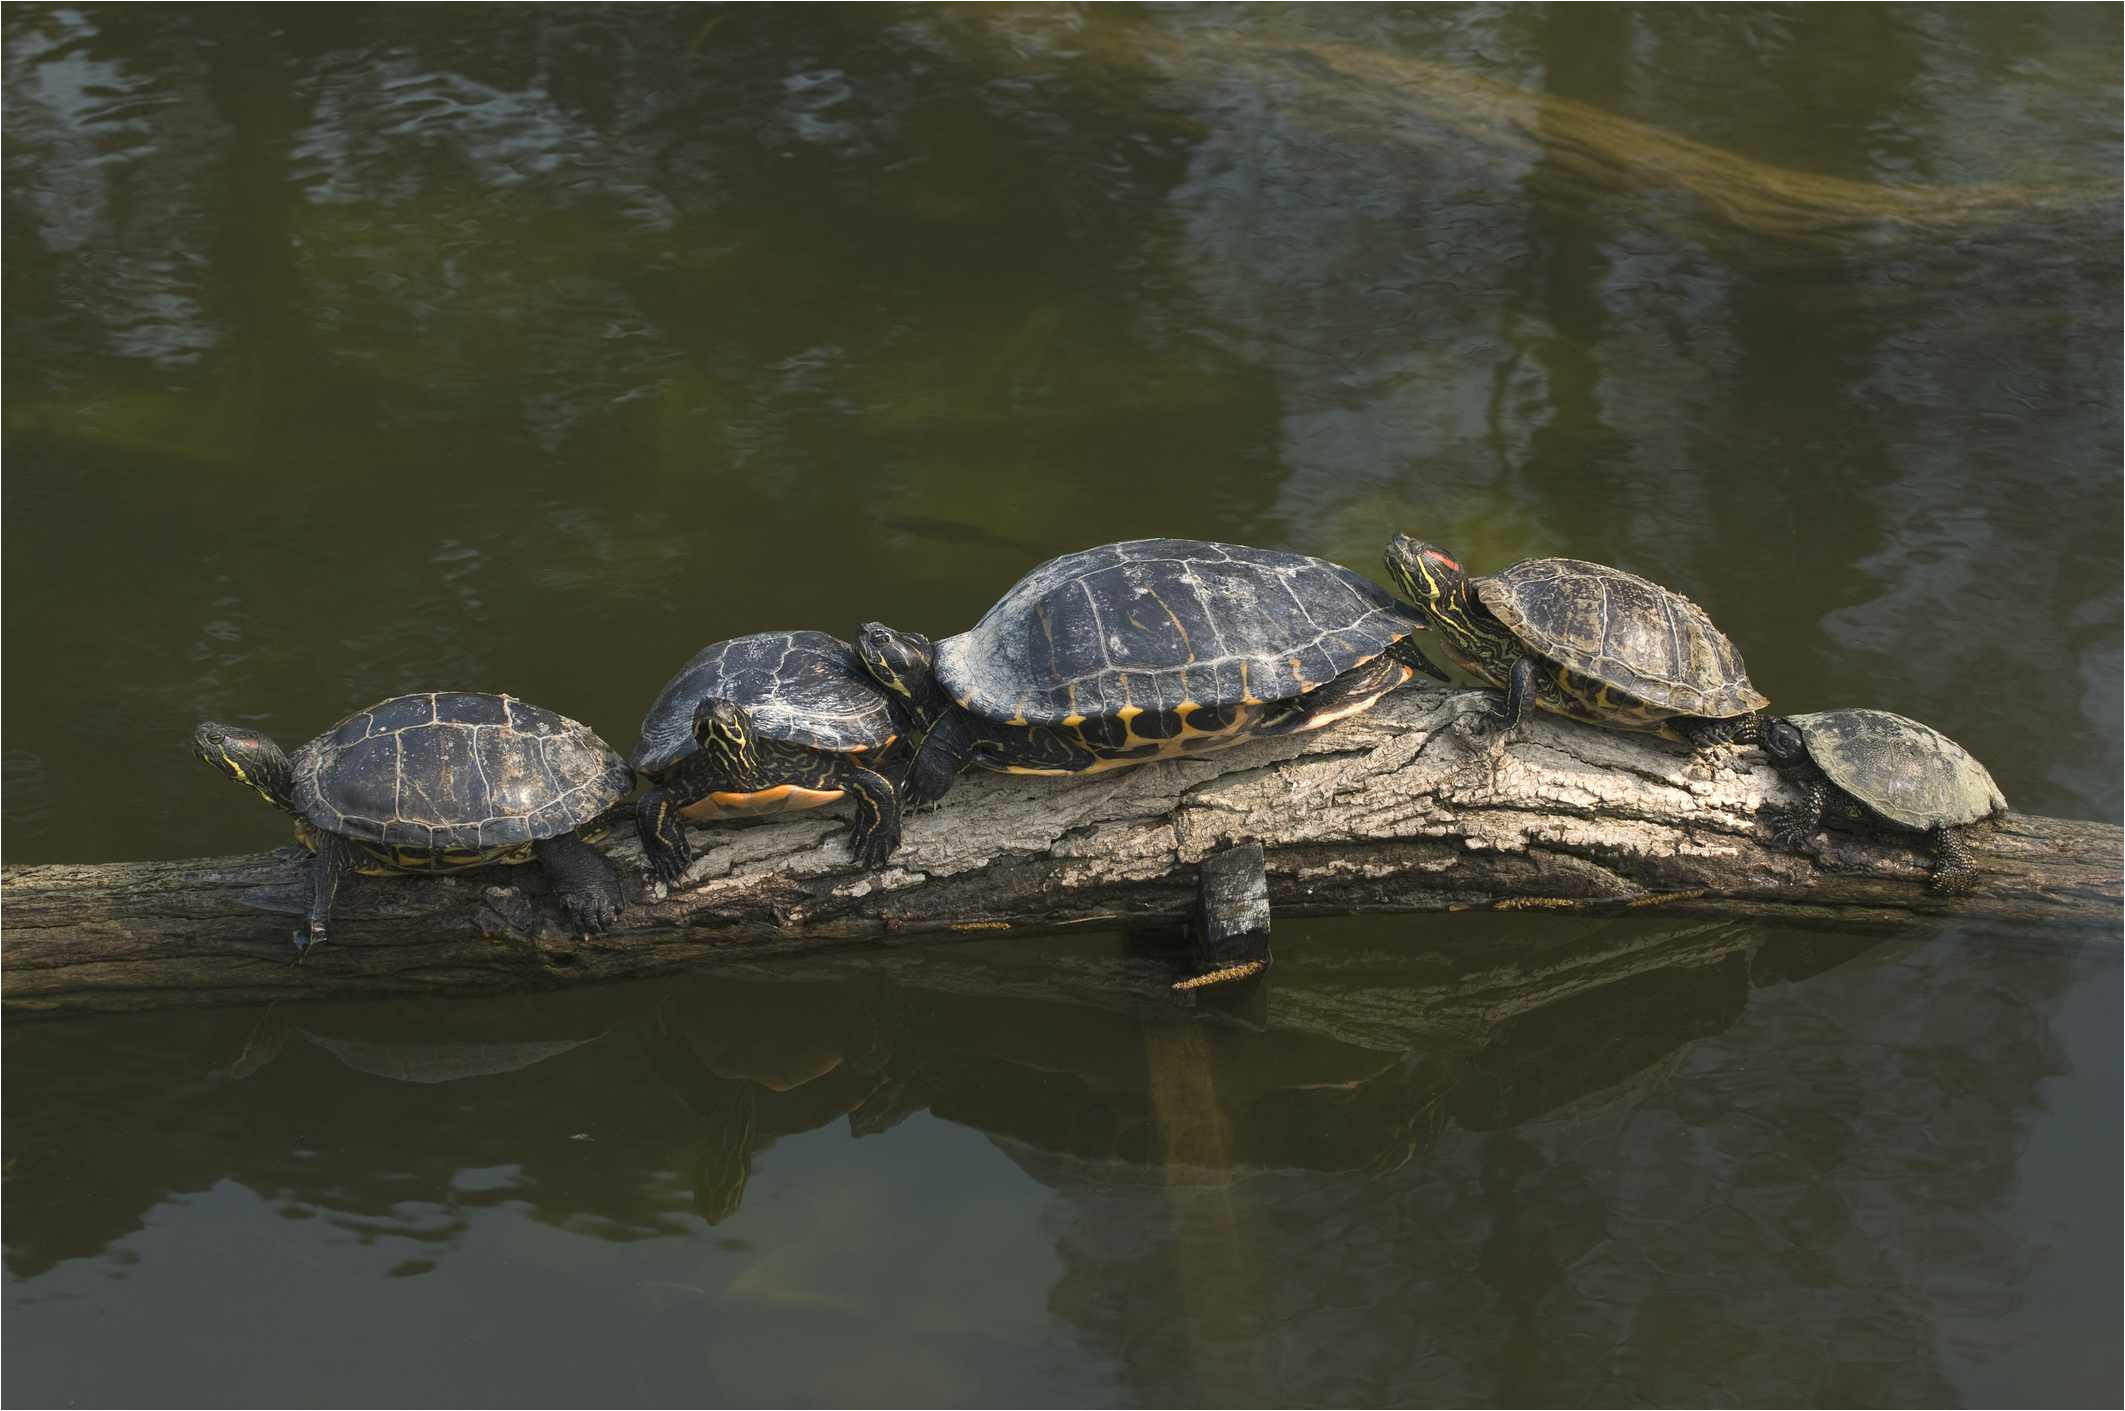 aquatic turtles lined up on a log